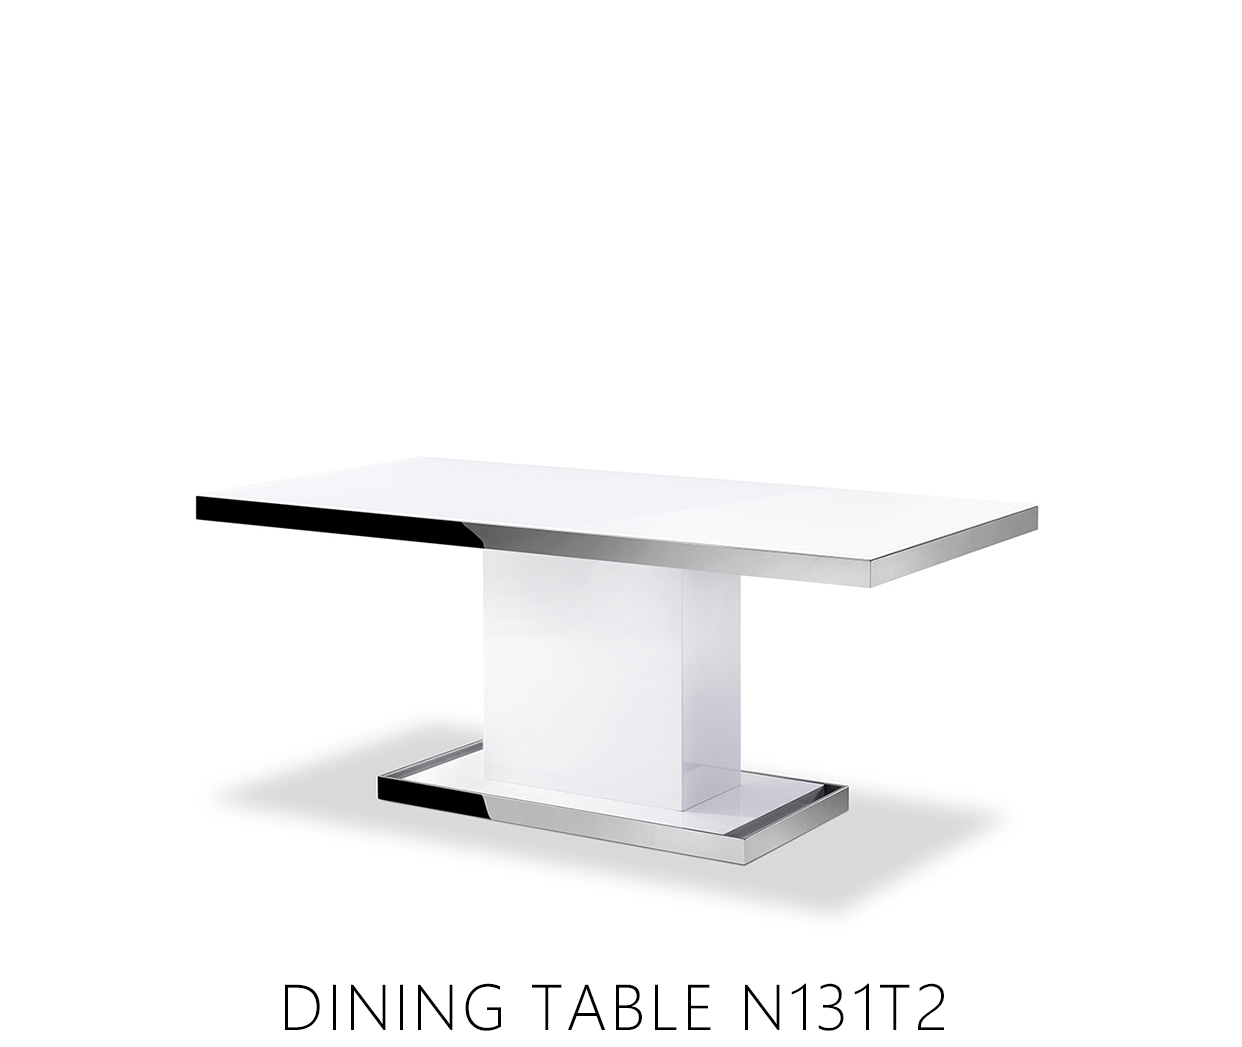  DINING TABLE N131T2